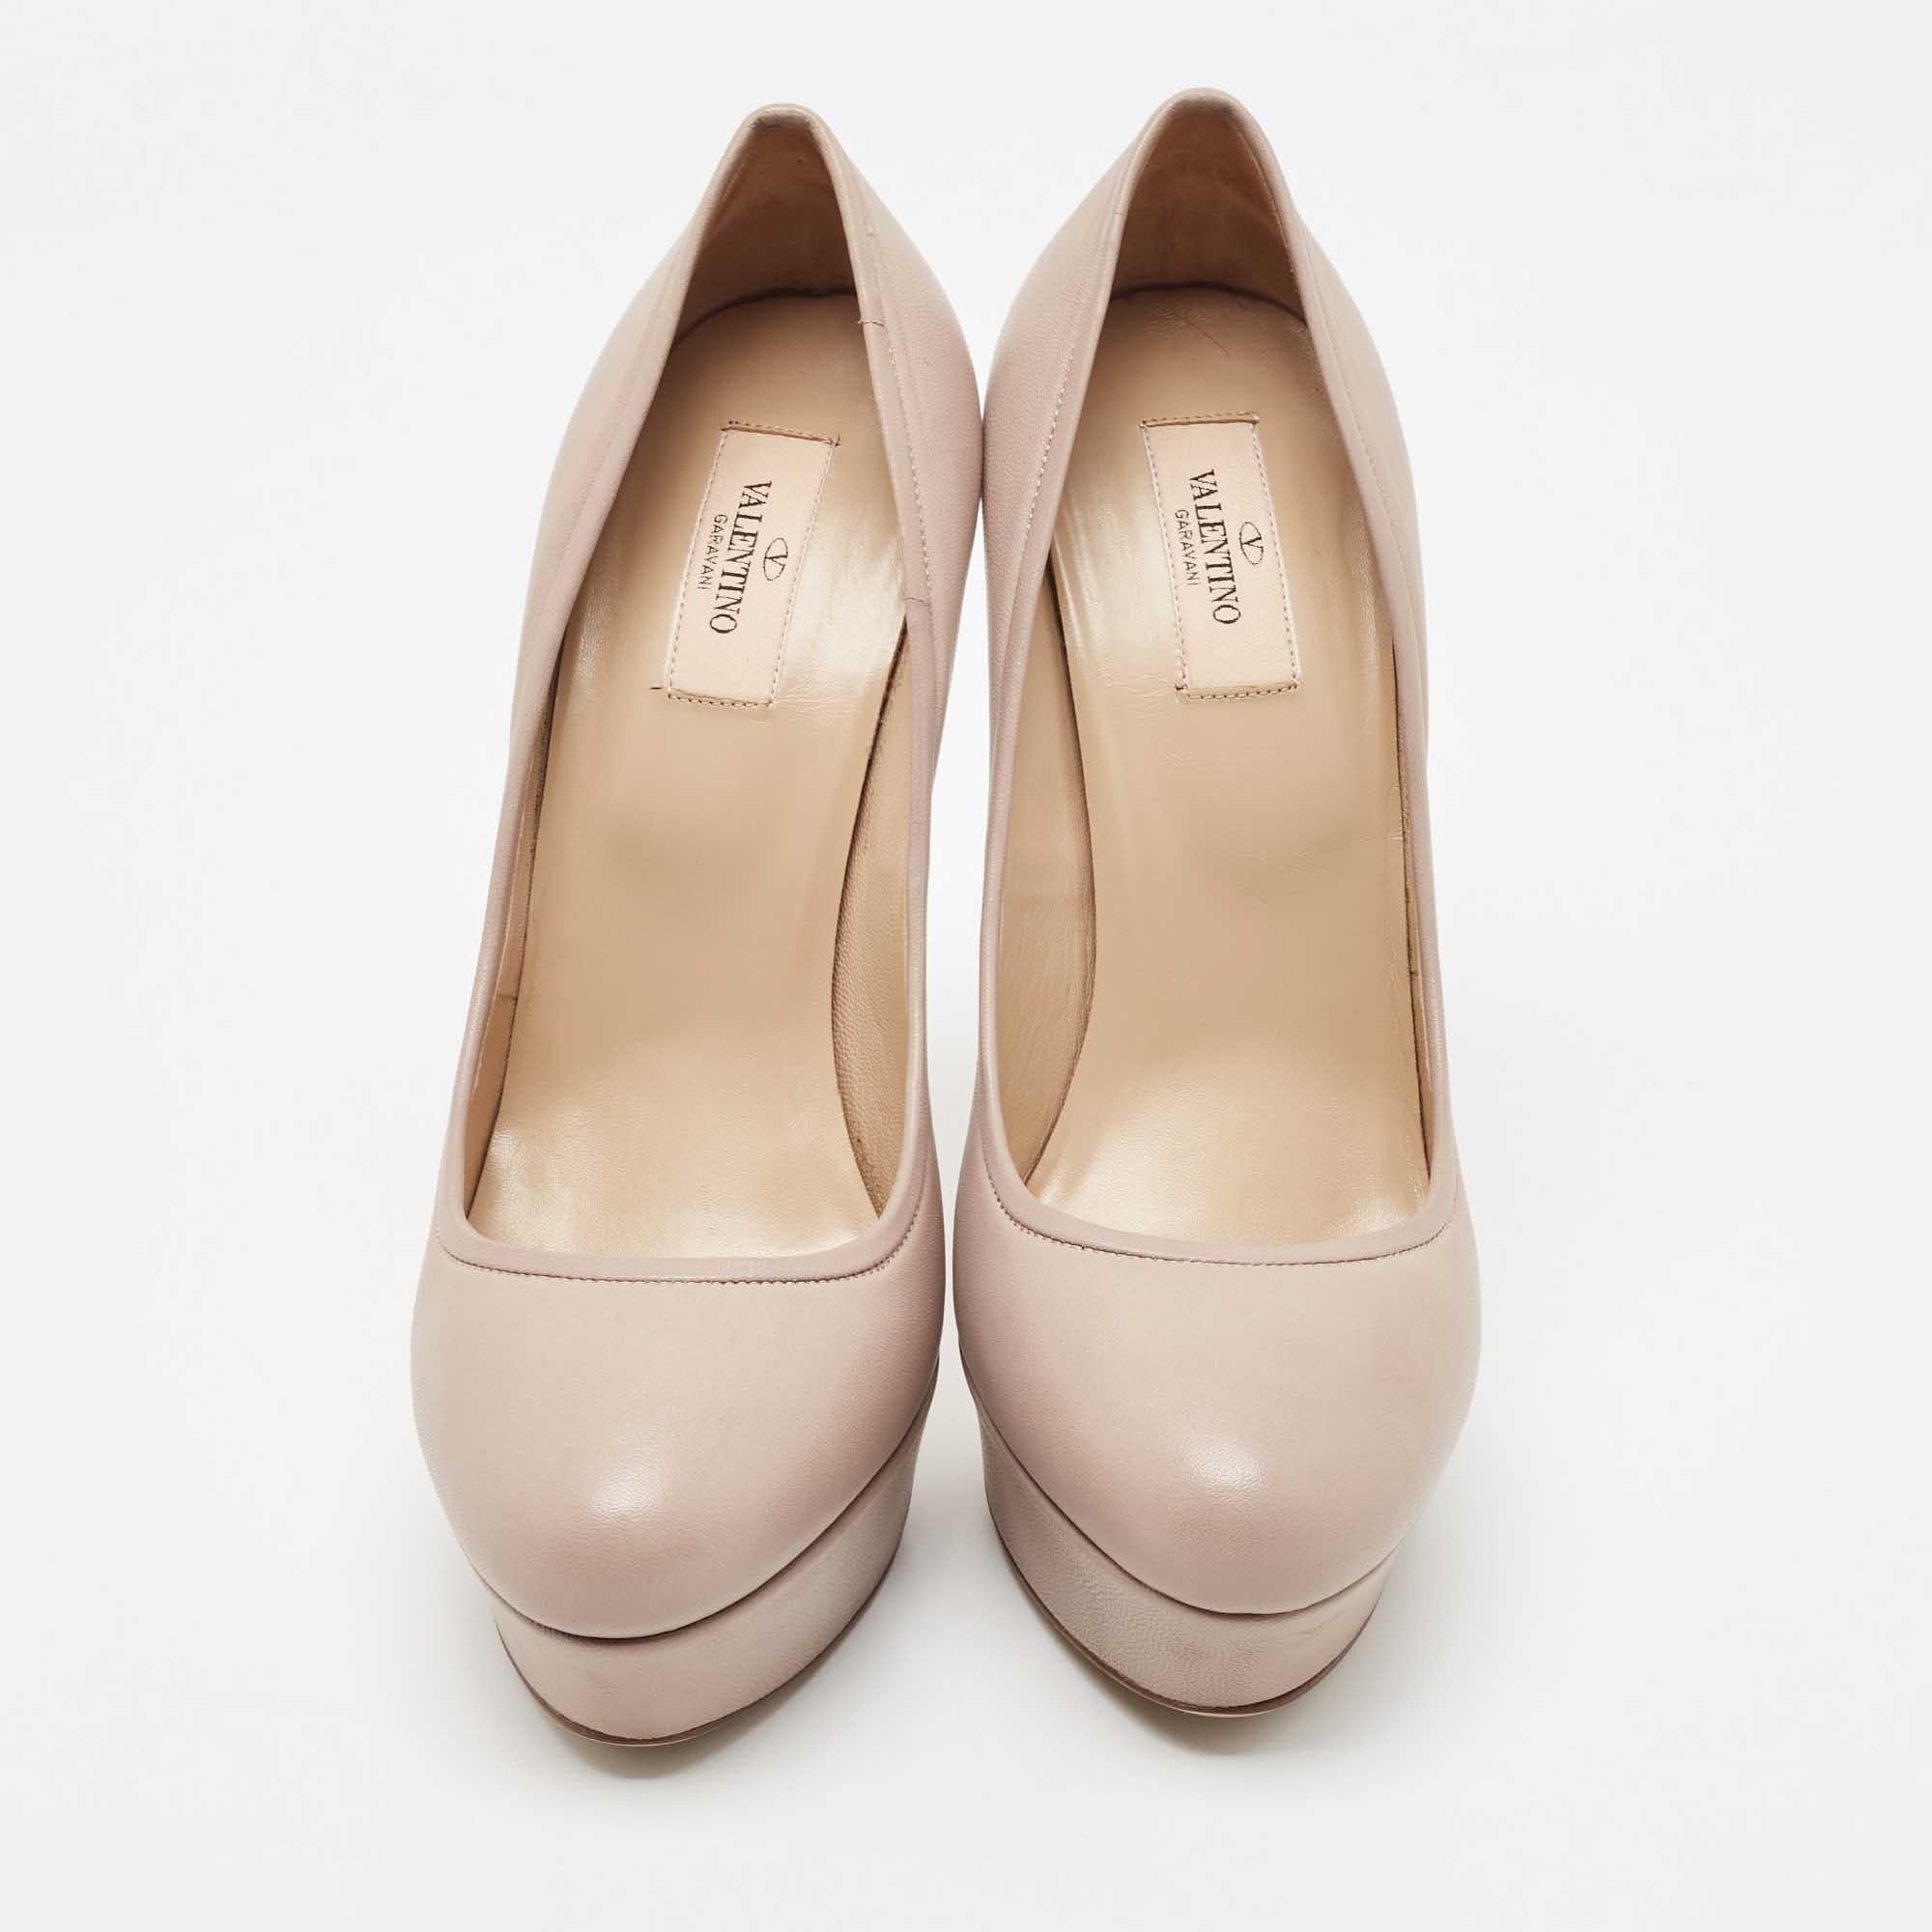 Lend an uber-chic look to your ensemble with this pair of Valentino pumps. Made from beige leather, they feature round toes and leather-lined insoles. These pumps are set on platforms and 11cm stiletto heels that will surely make heads